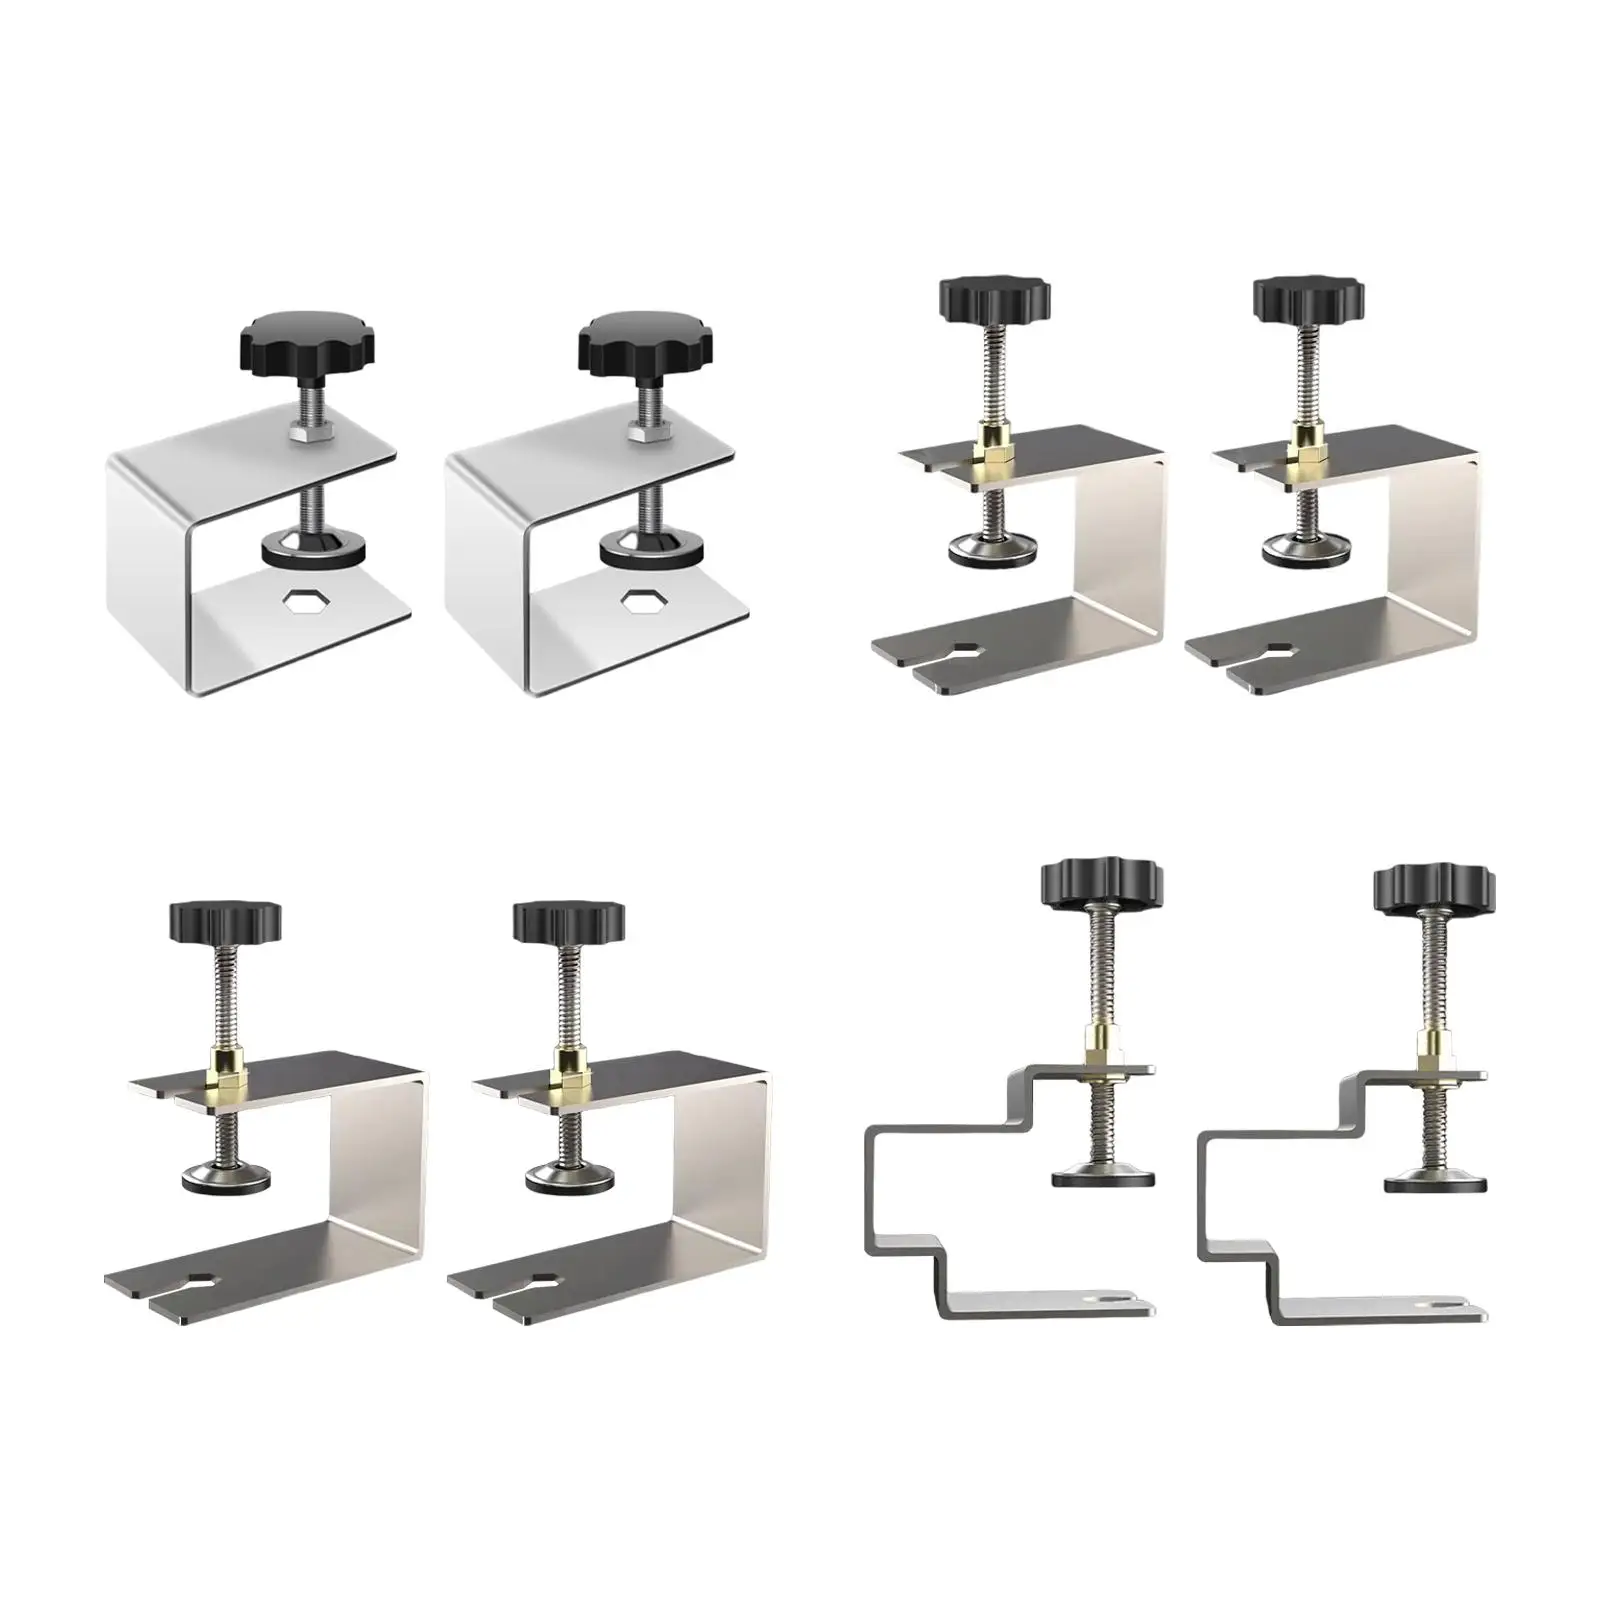 2Pcs Cabinet Drawer Front Installation Clamps, Stainless Steel Woodworking Clamps Tools Drawer Fast Installation